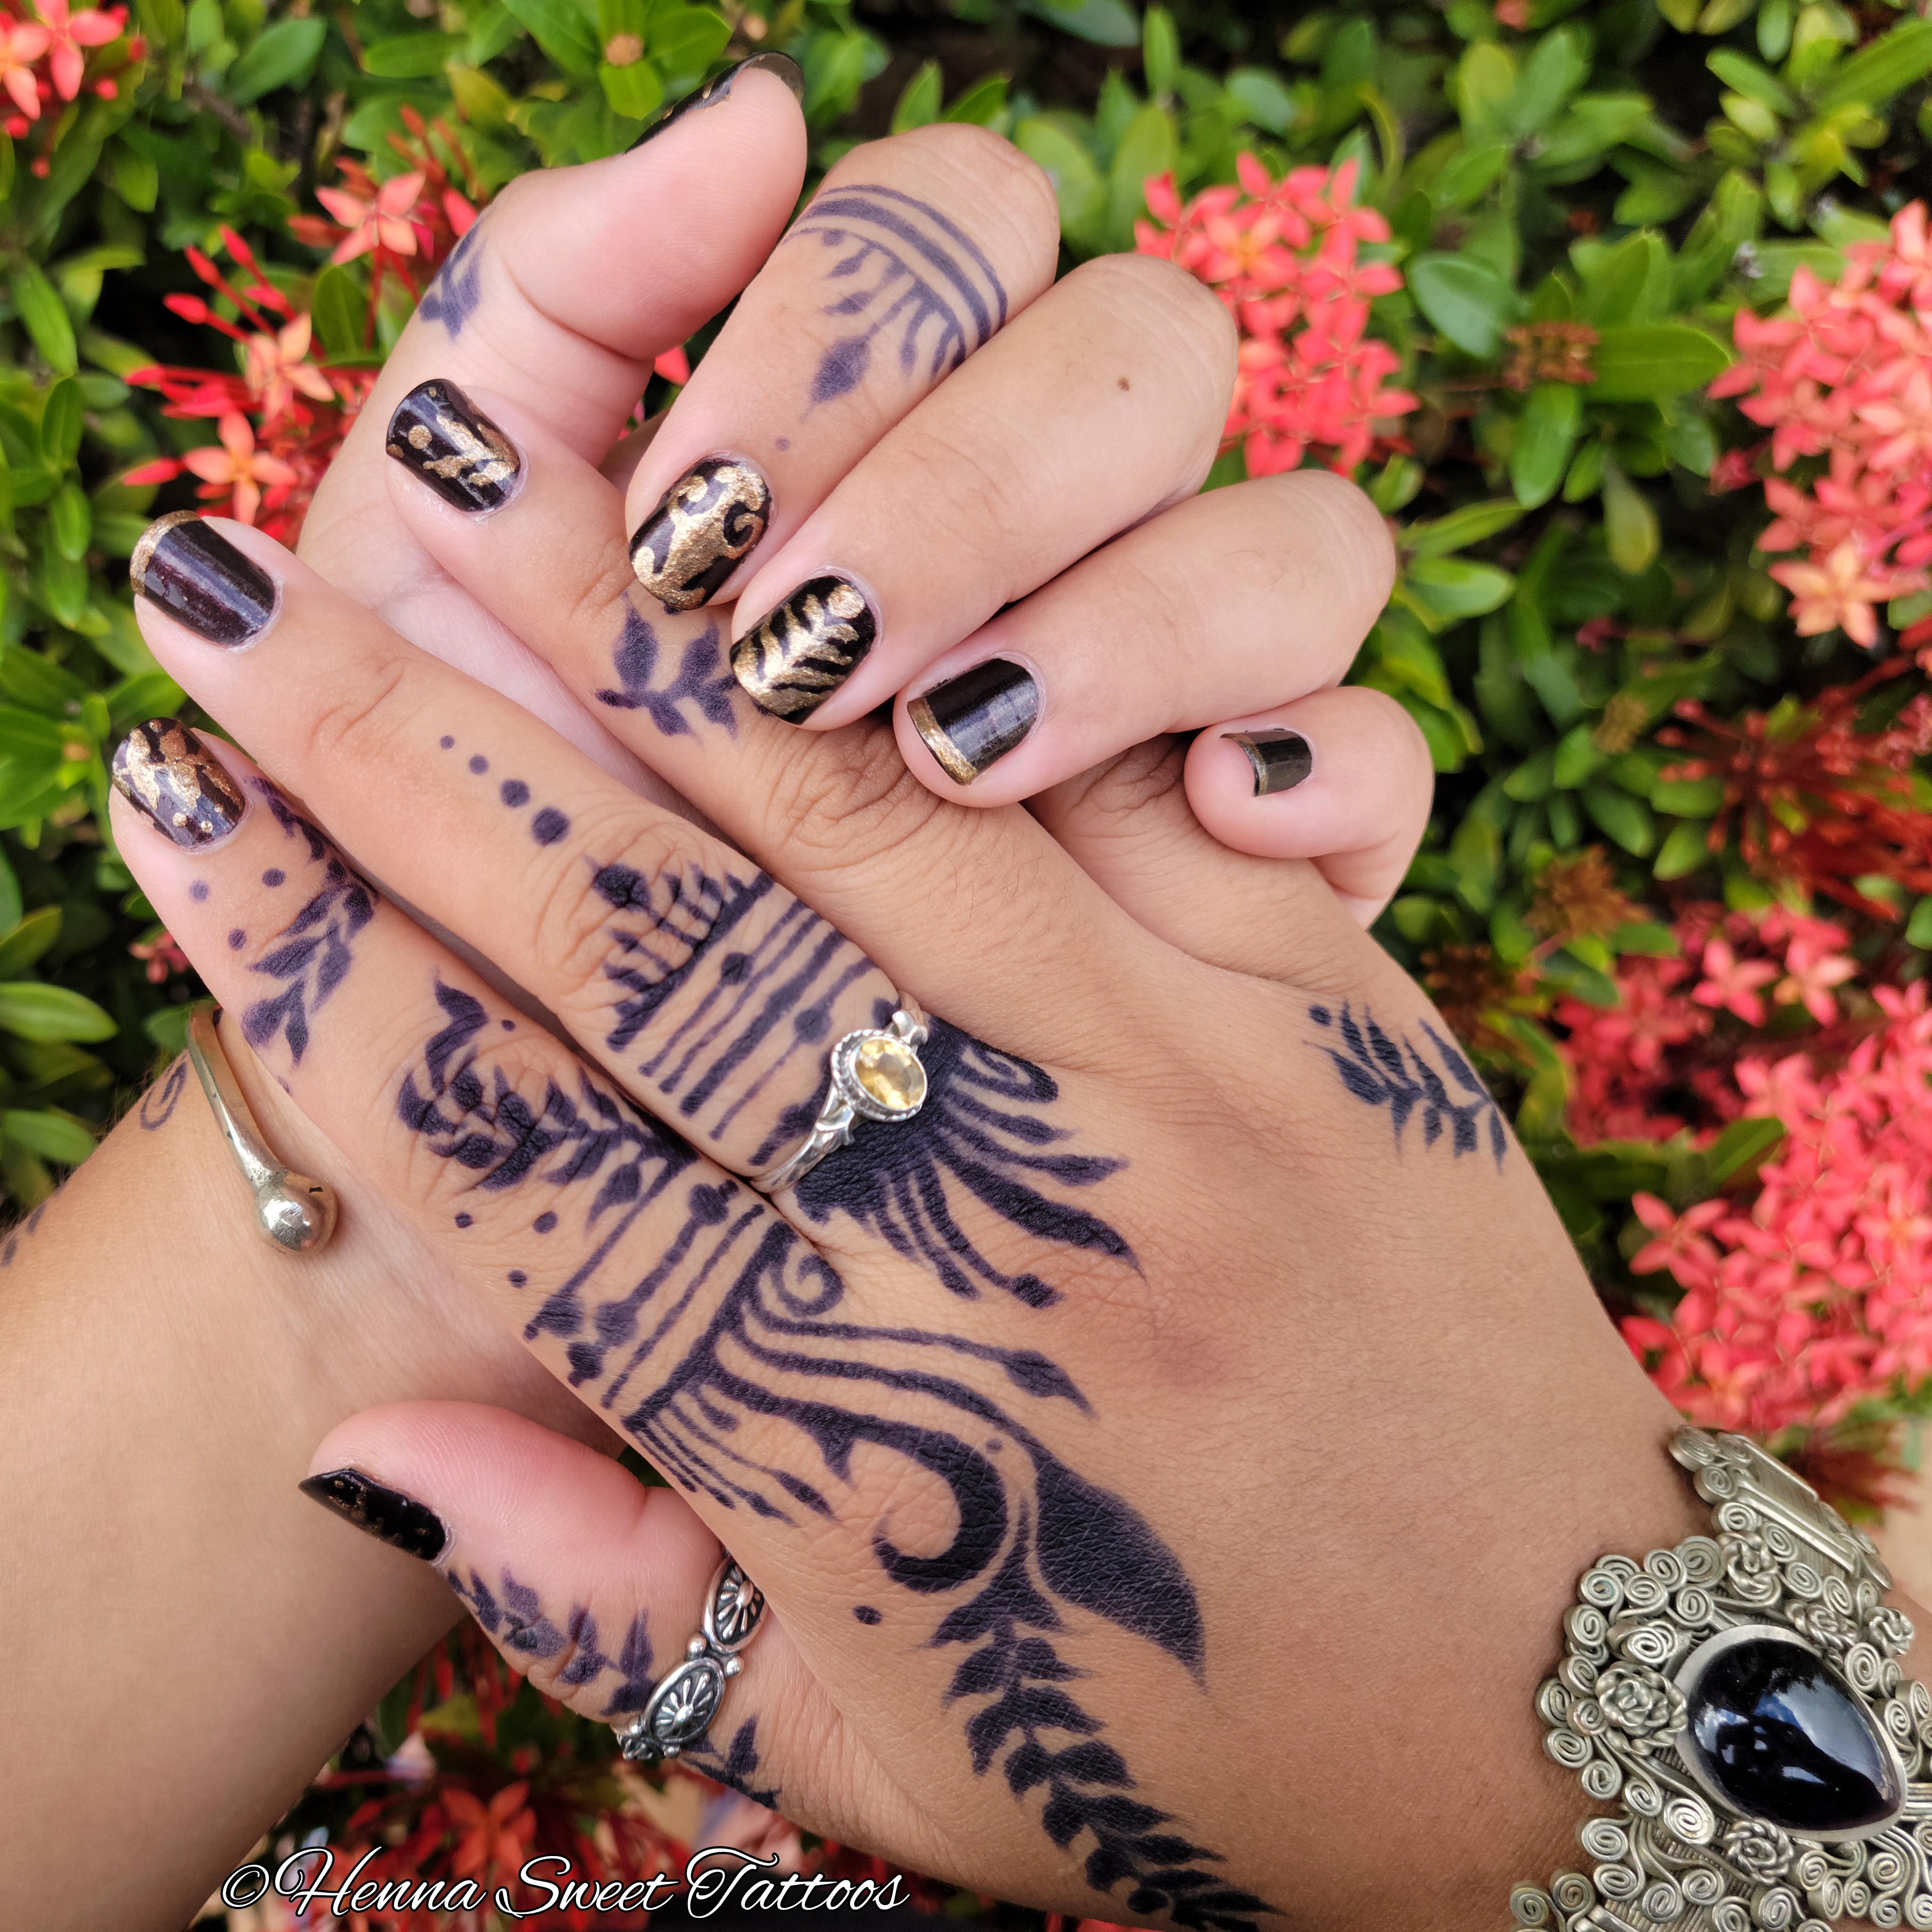 Why Not Try Creating Your Own Henna Tattoo I Creating henna tattoos is fun